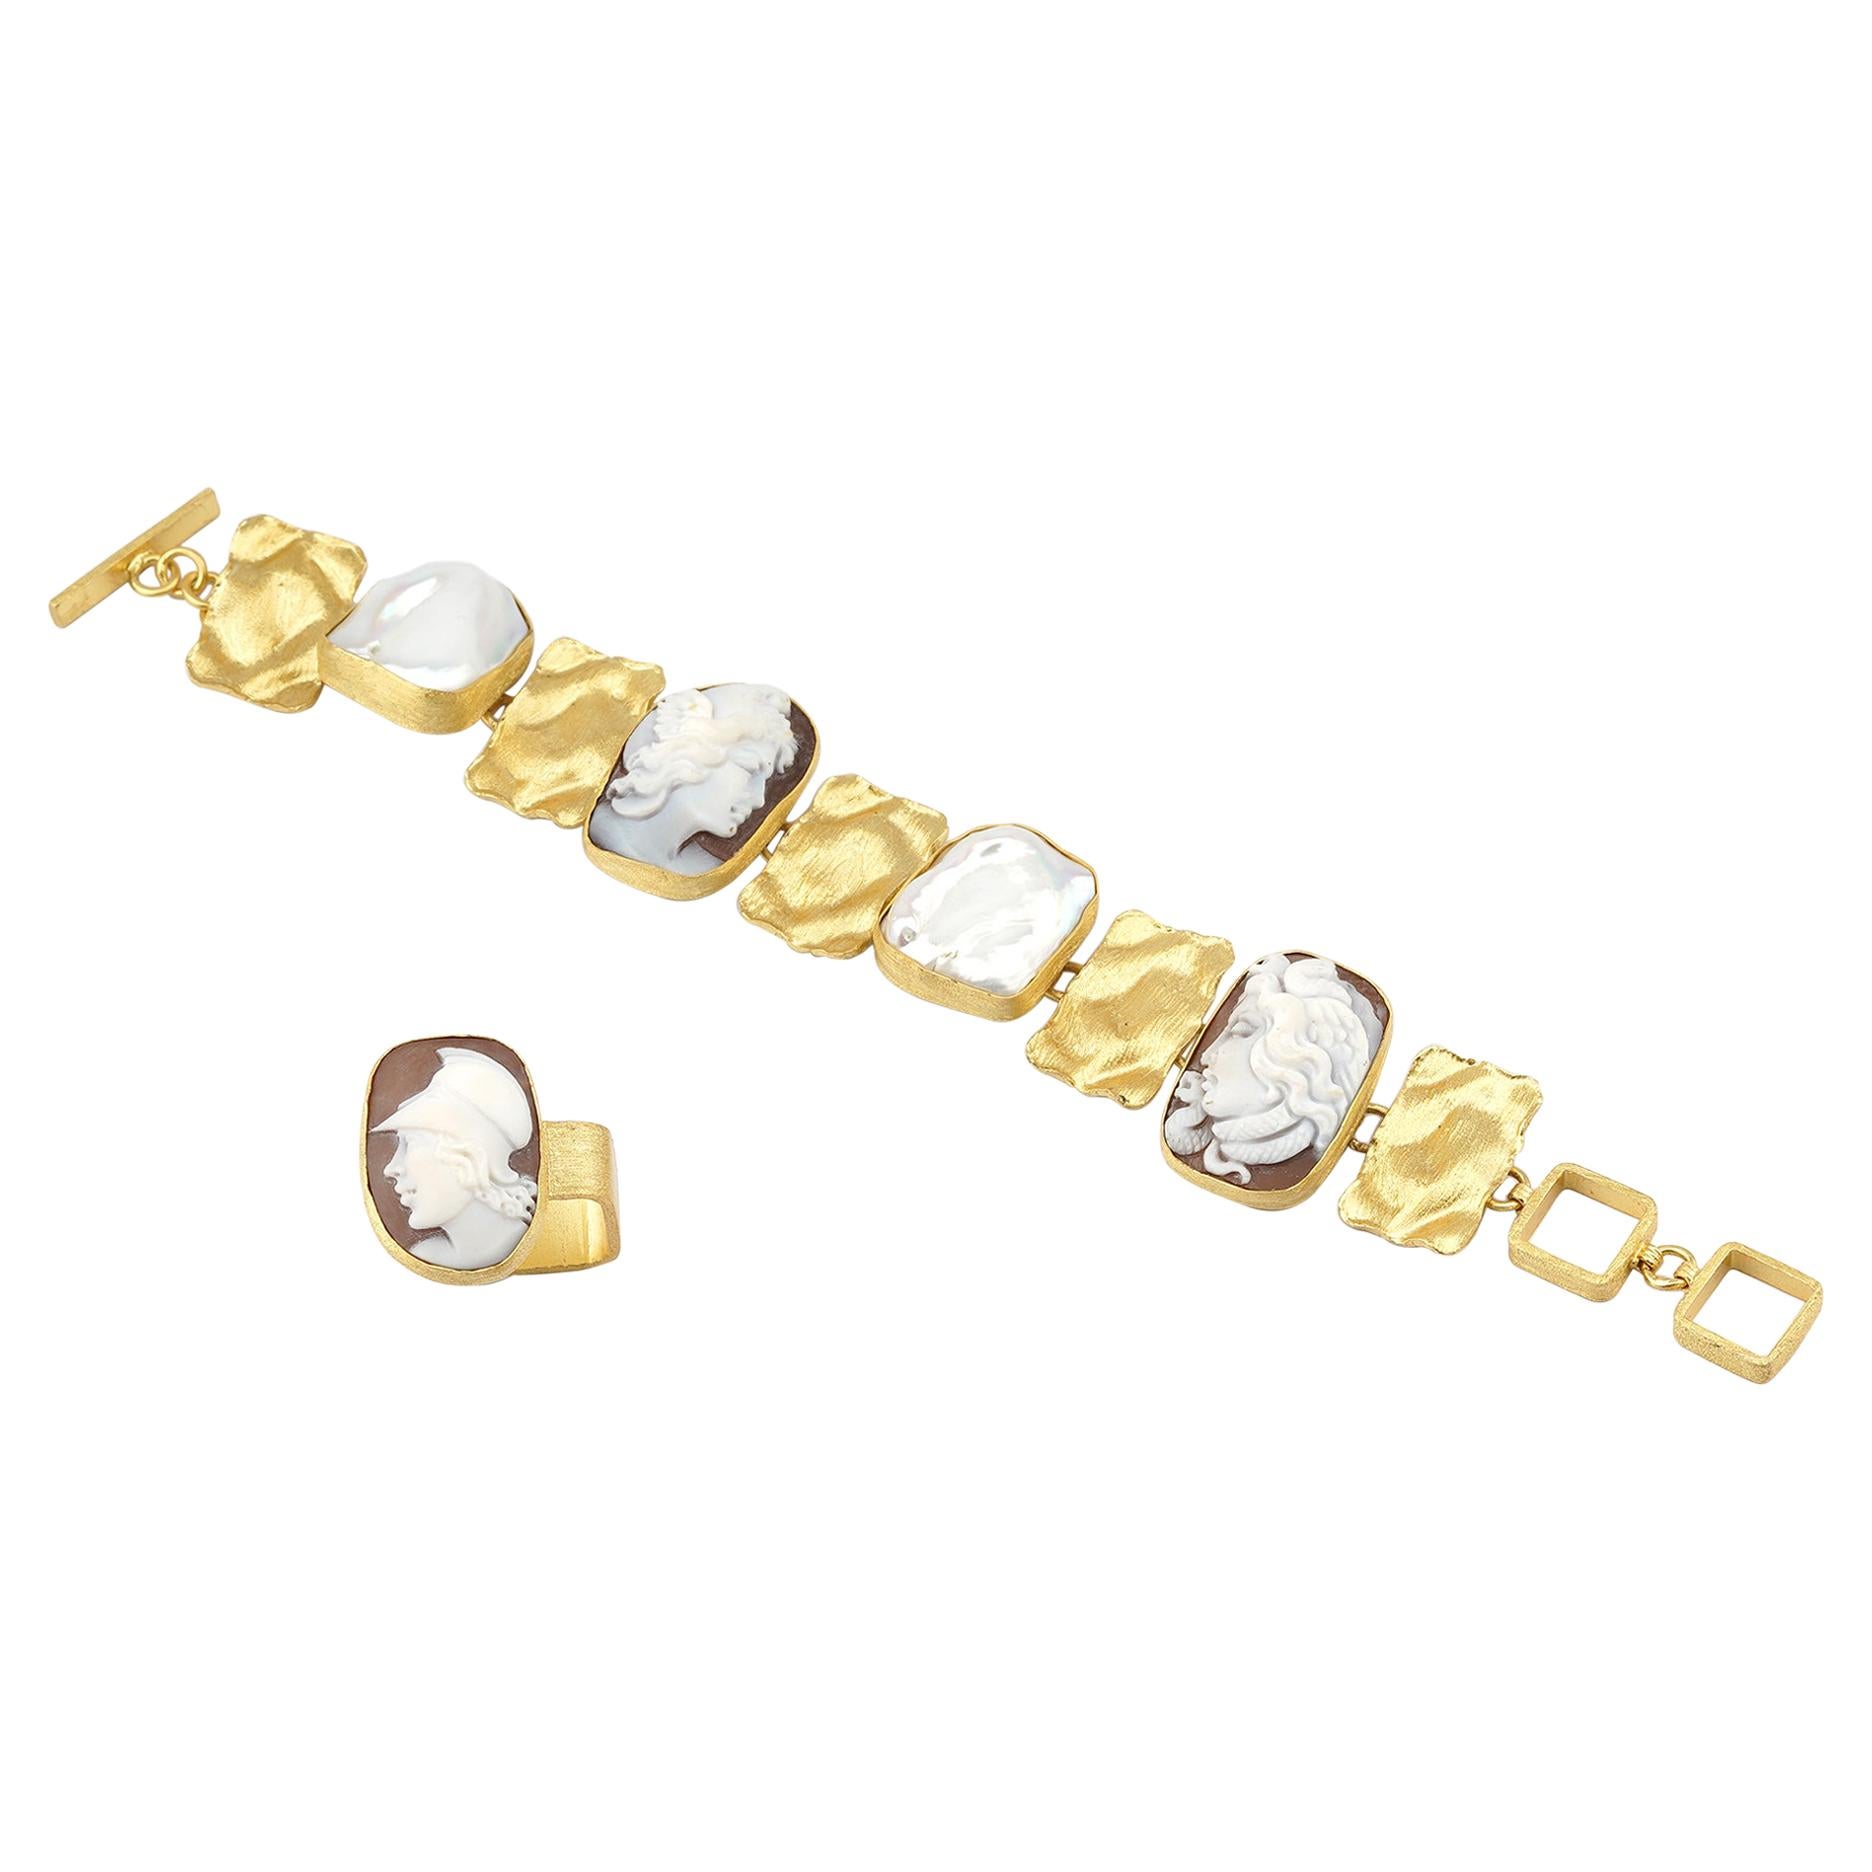 18 Carat Gold-Plated 925 Sterling Silver Sea Shell Cameos Ring Bracelet Set For Sale